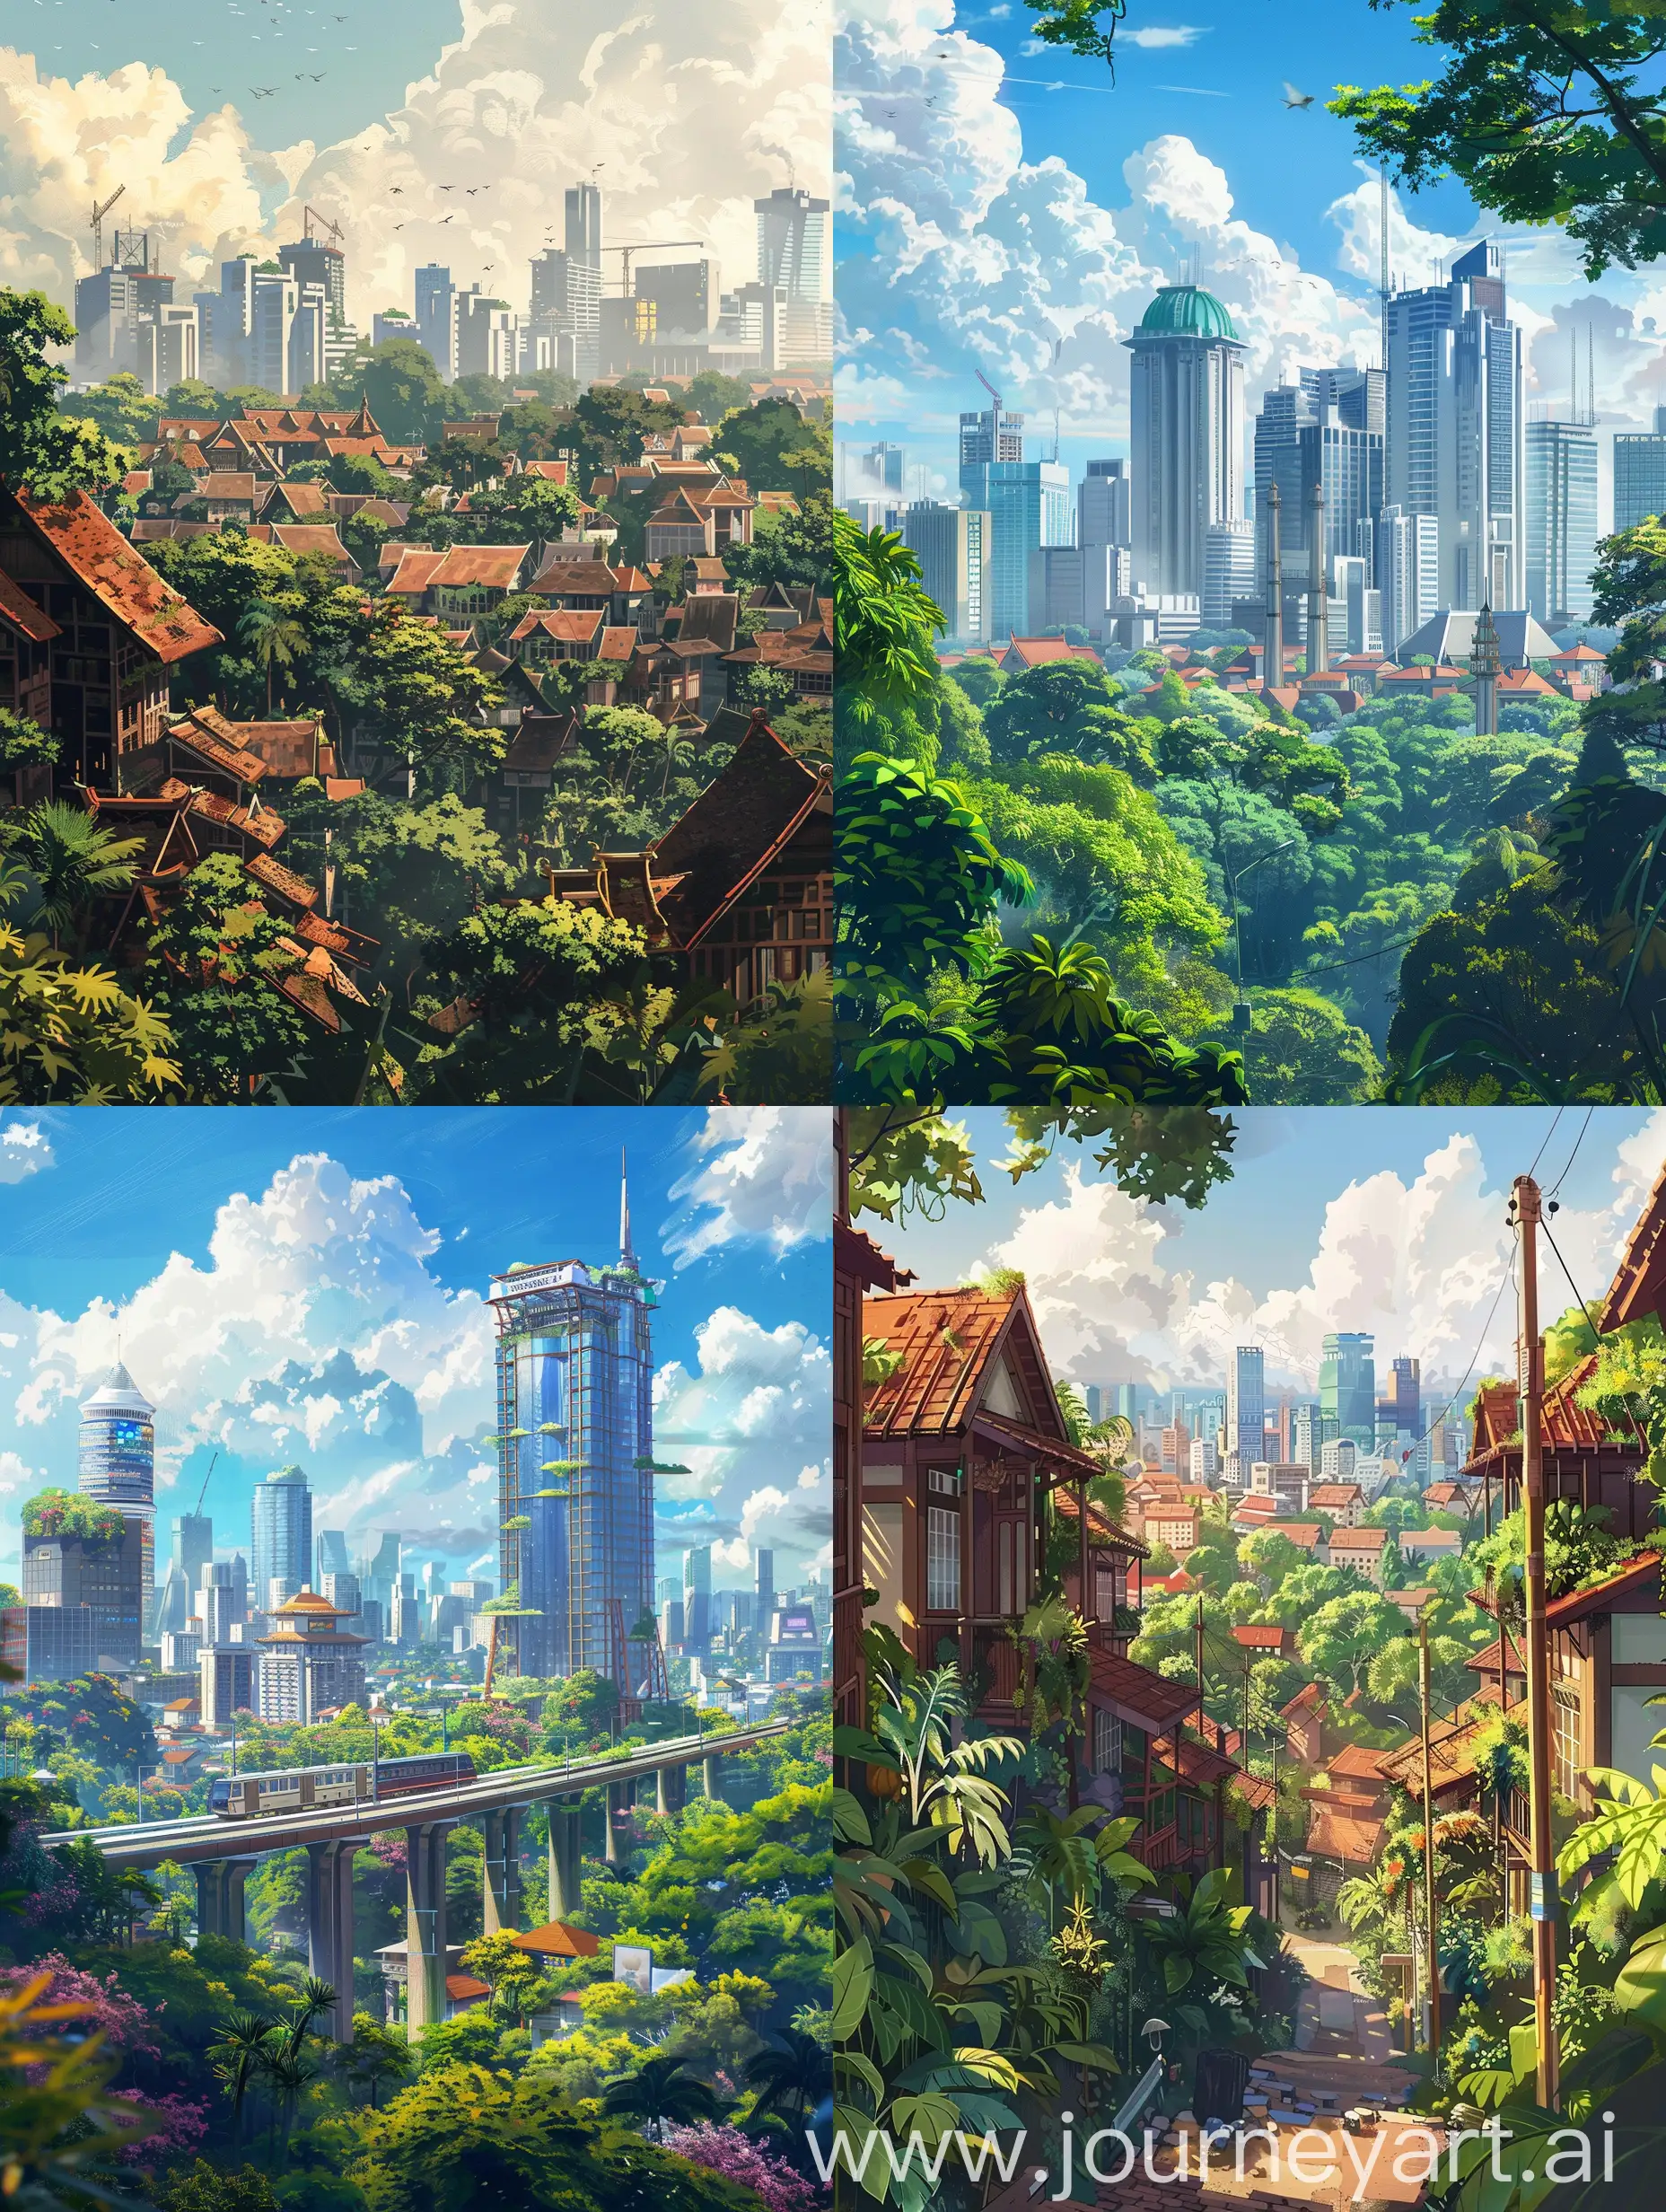 A picture of a Jakarta city indonesia inspired by Studio Ghibli Art Style